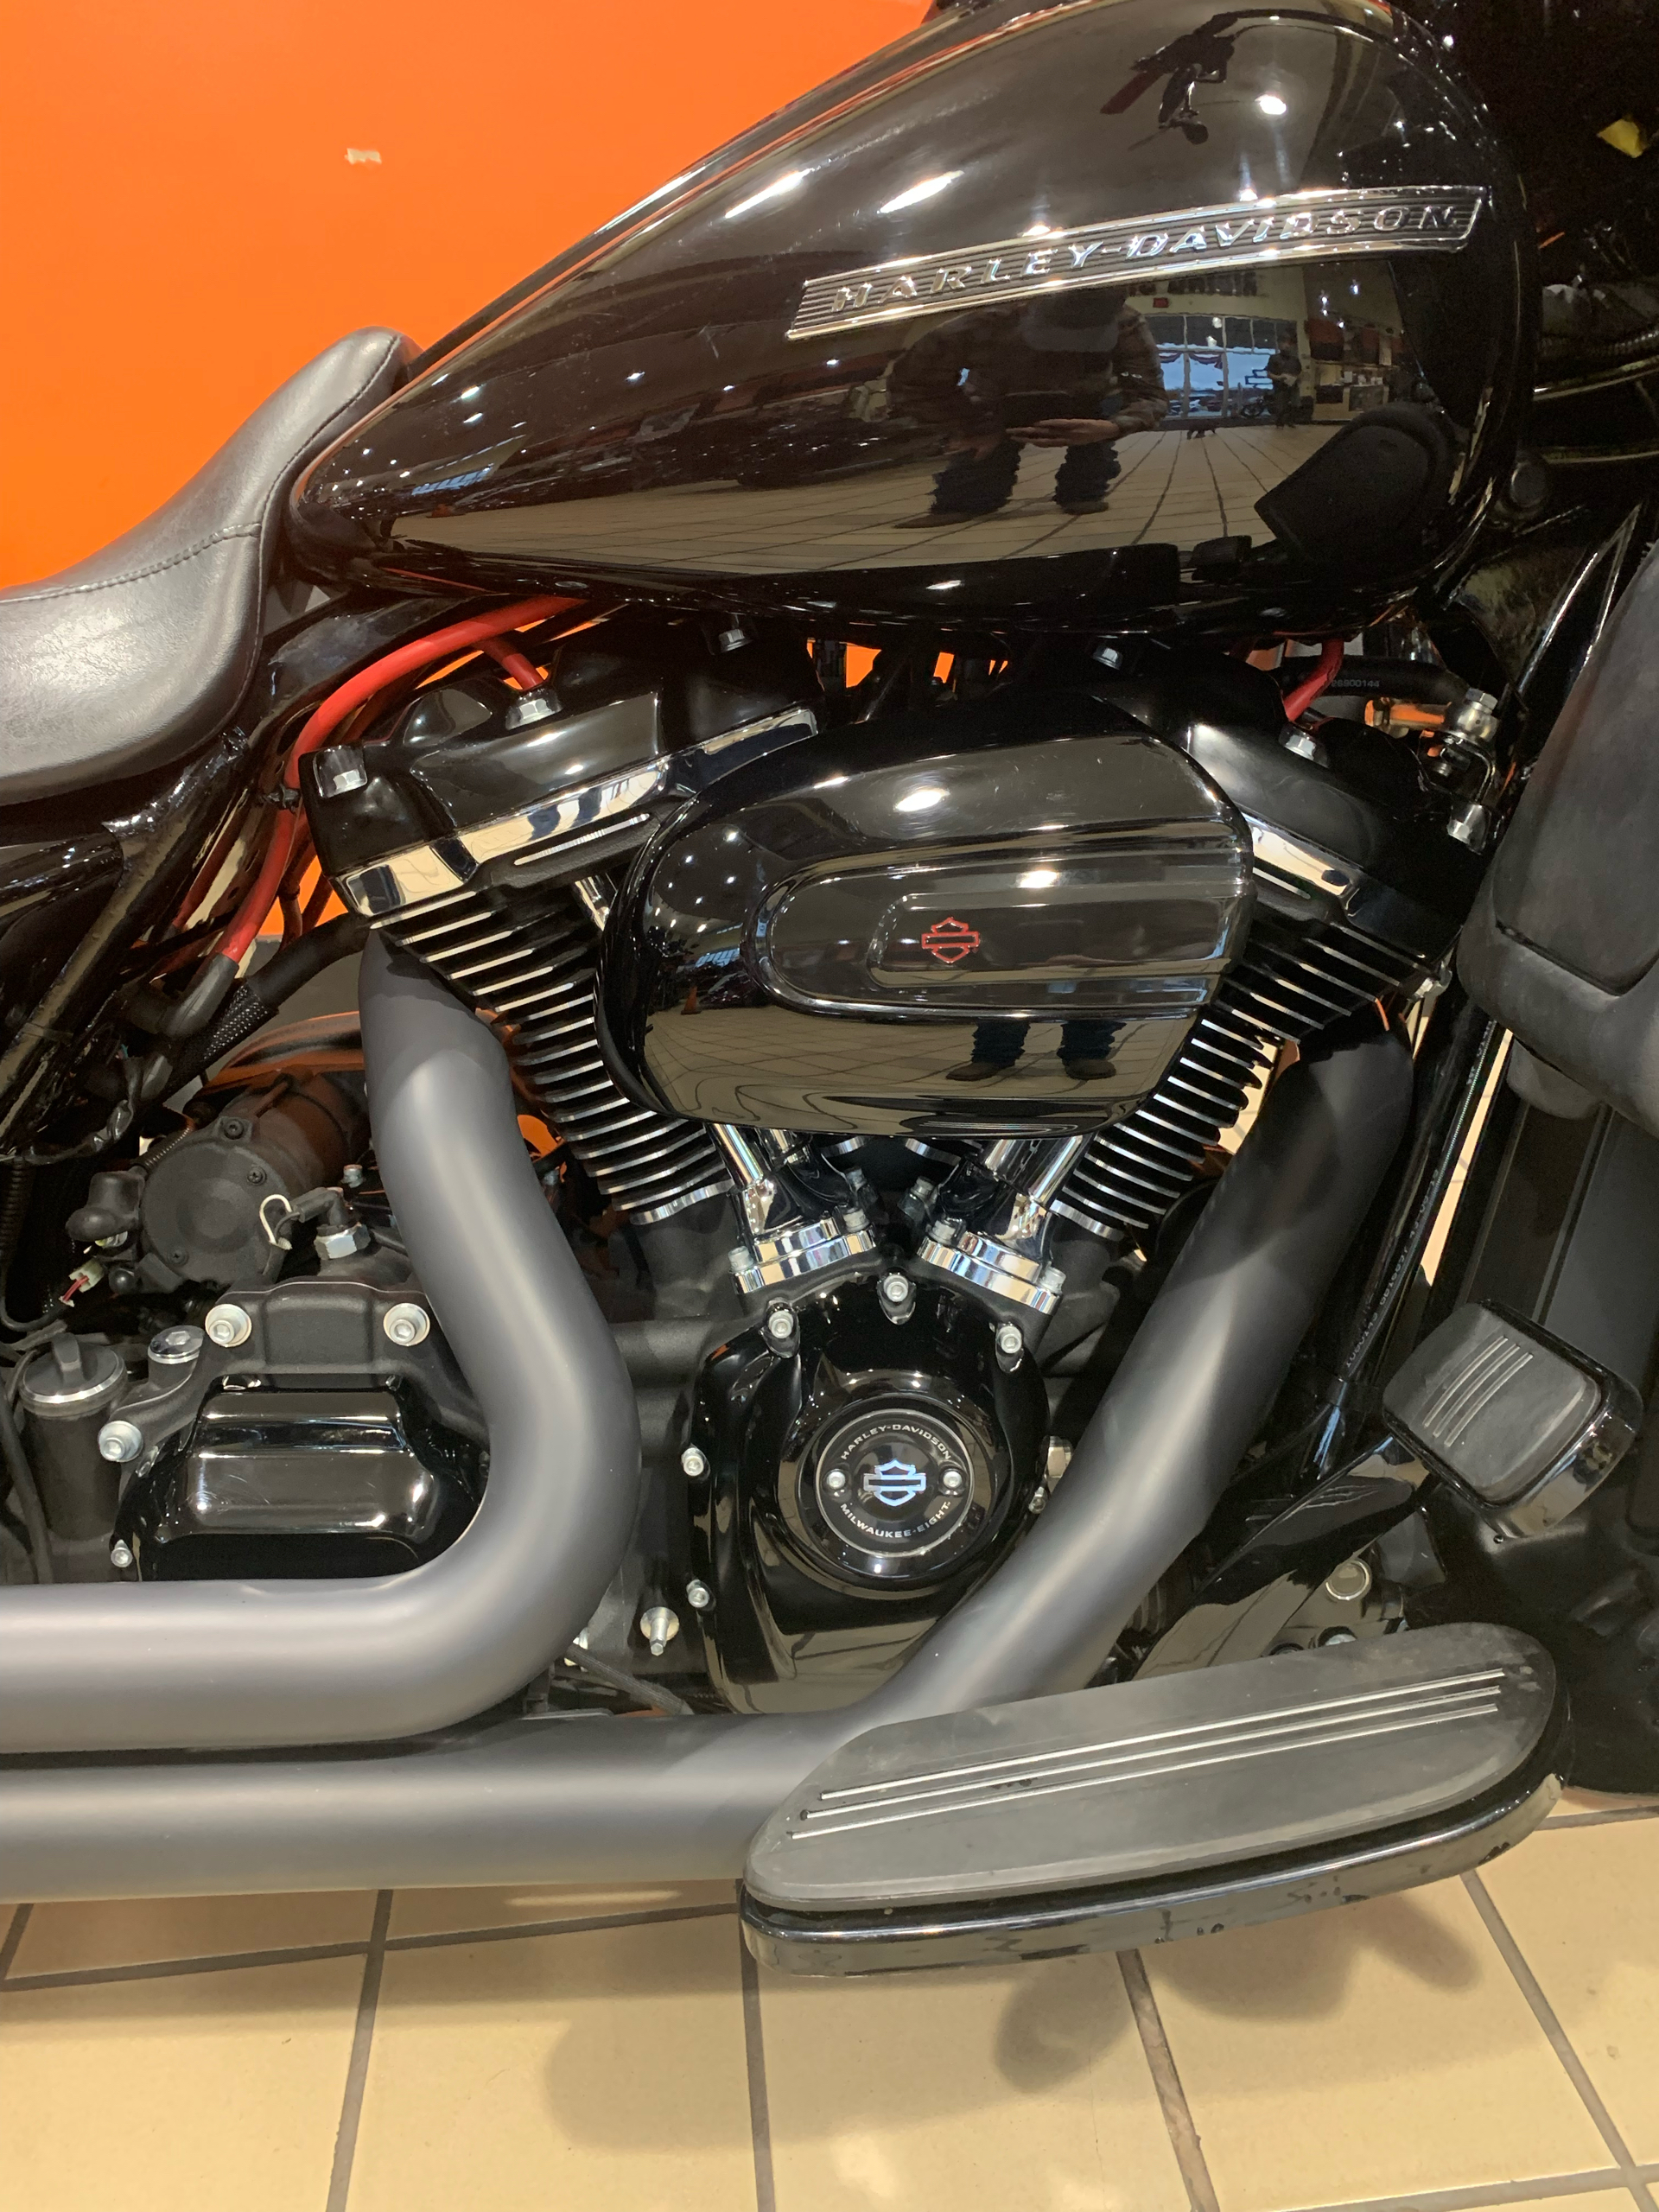 2019 Harley-Davidson ROAD GLIDE SPECIAL in Dumfries, Virginia - Photo 2